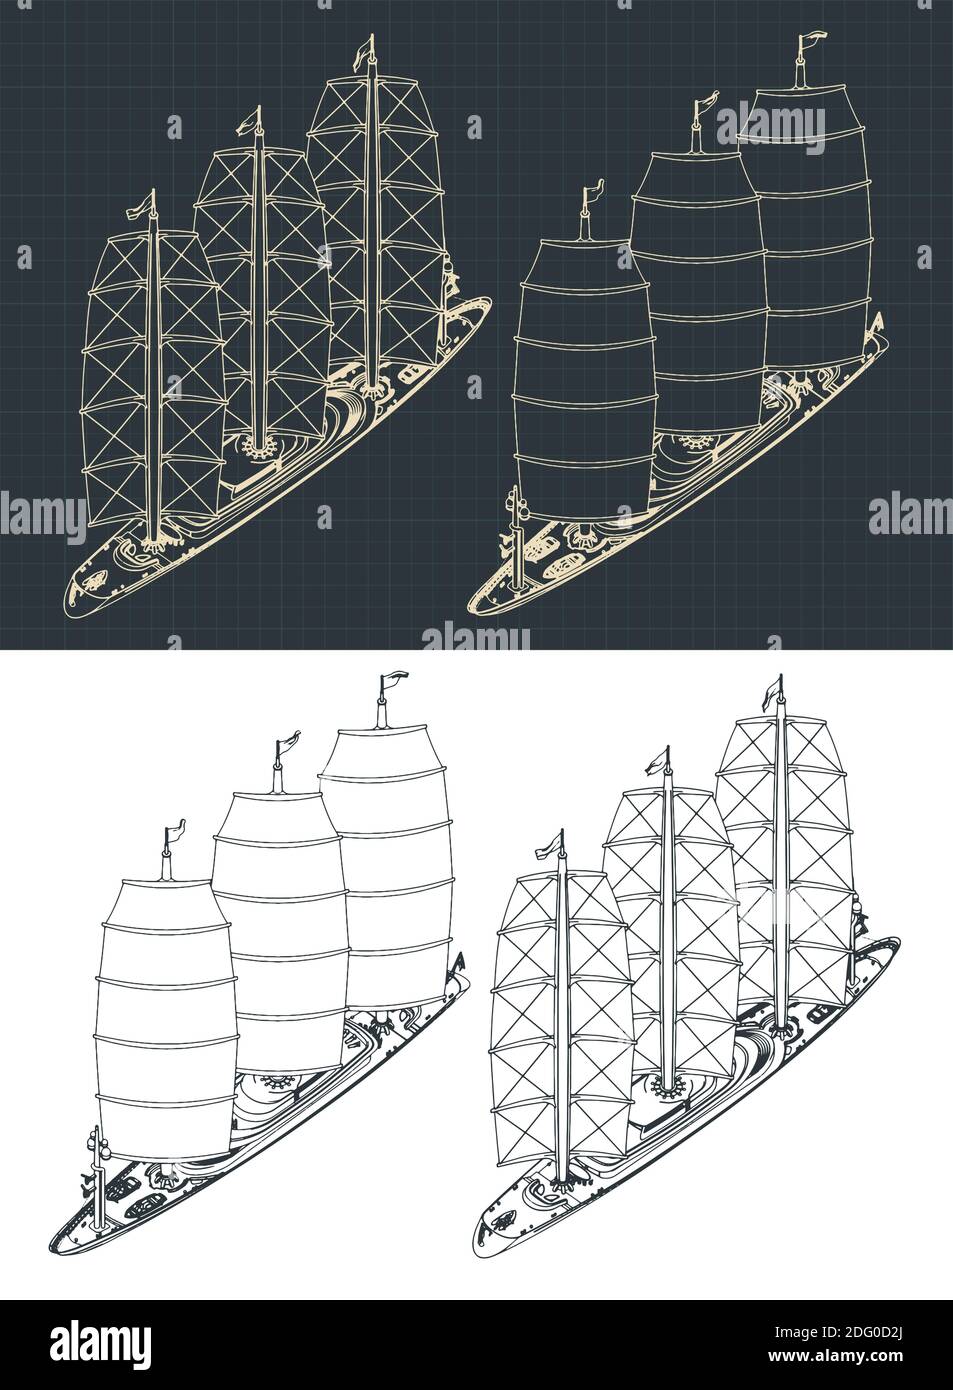 Stylized vector illustration of a large modern three-masted sailing ship isometric drawings Stock Vector